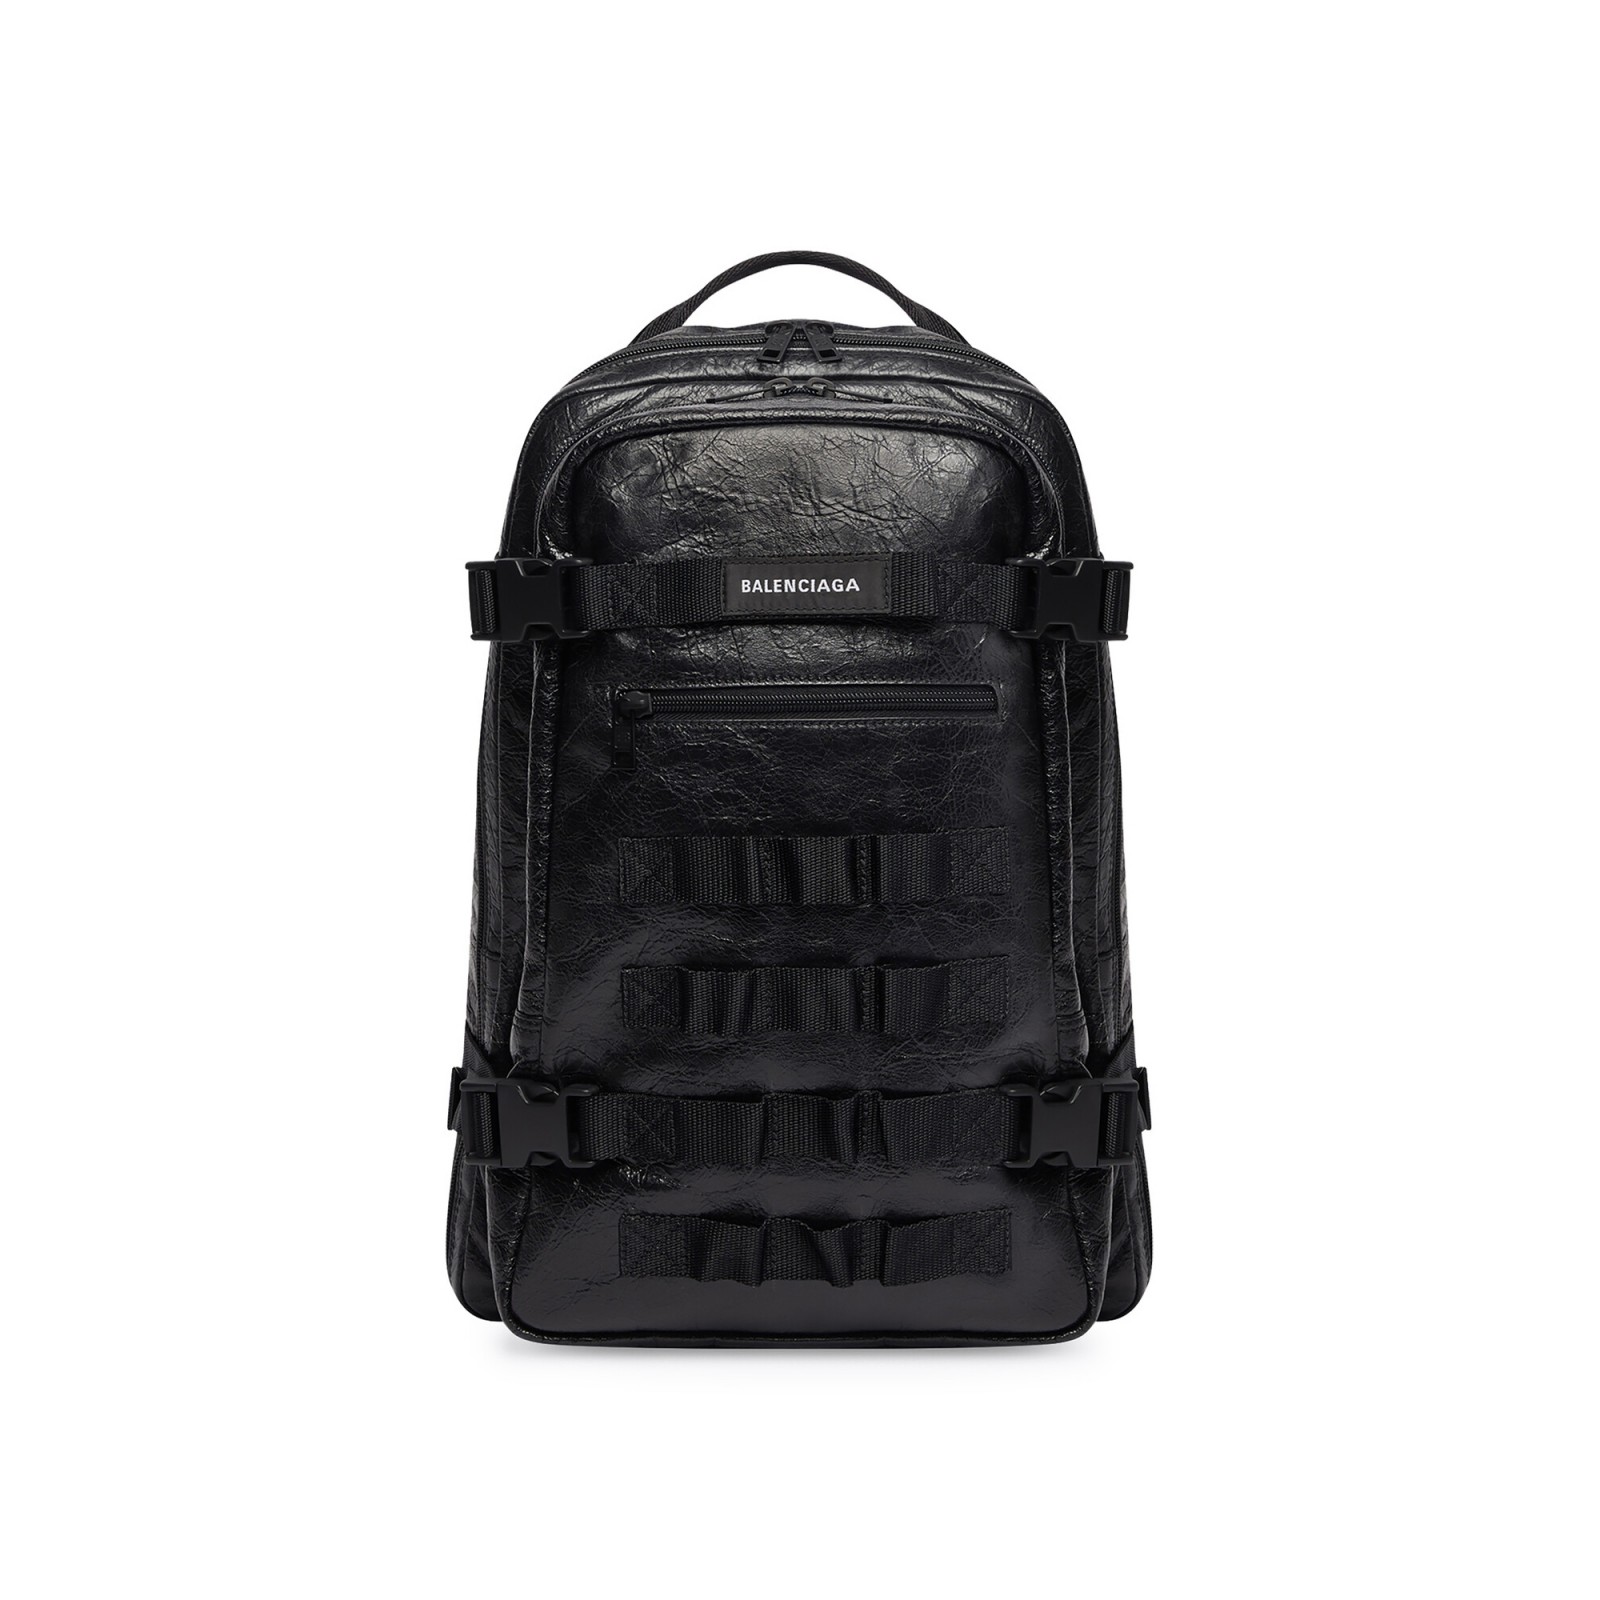 ARMY SMALL BACKPACK